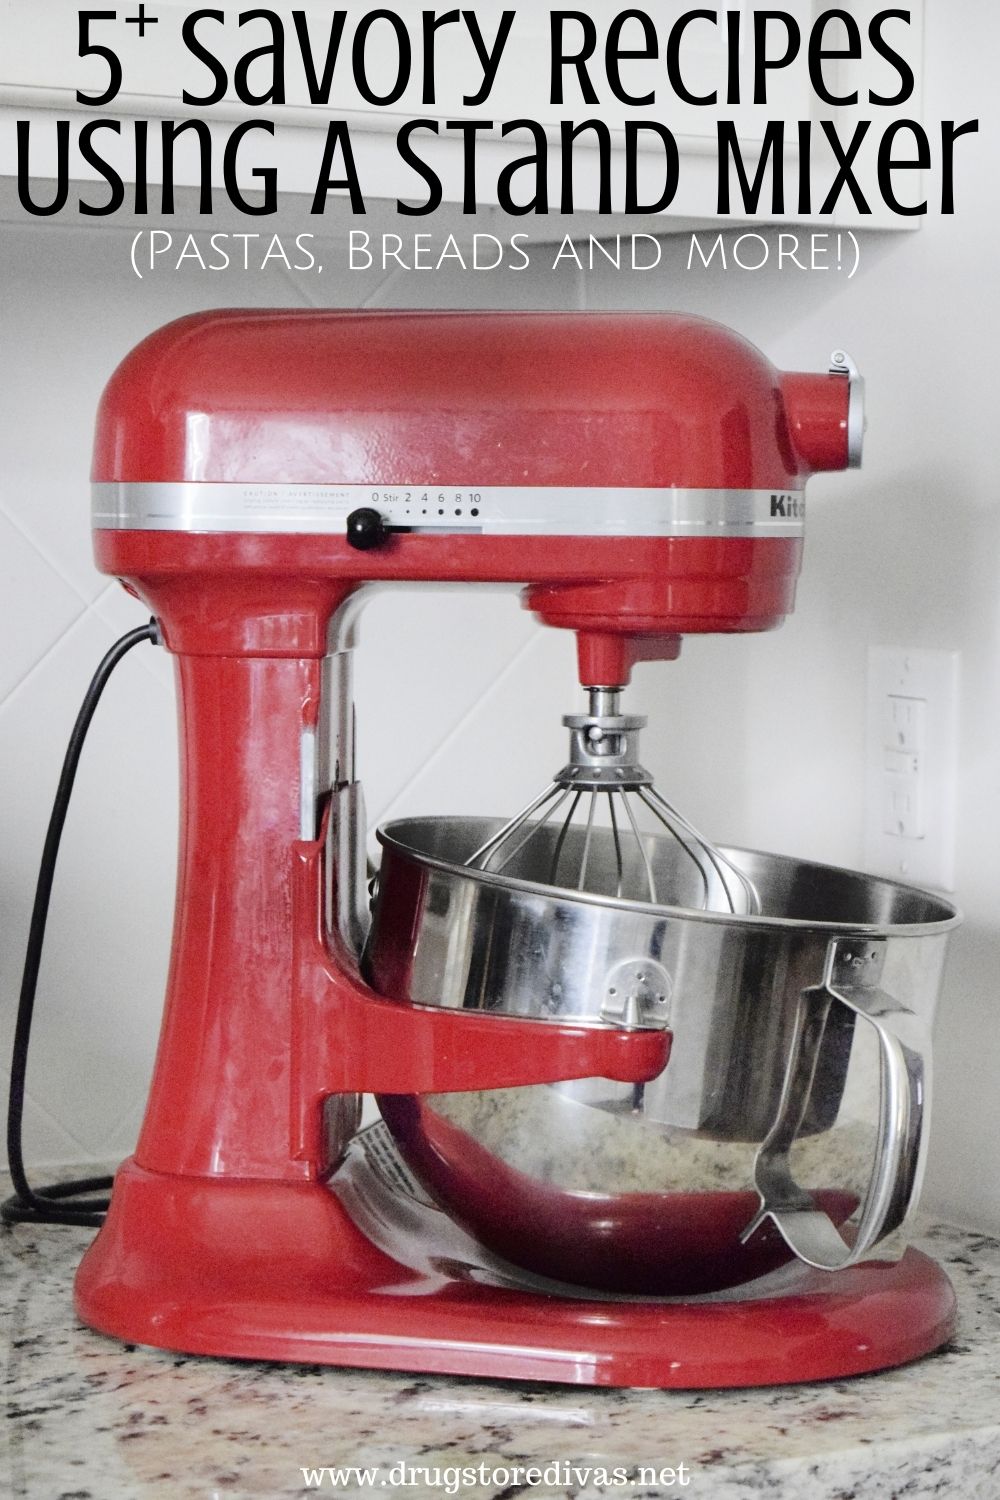 Savory Recipes Using A Stand Mixer